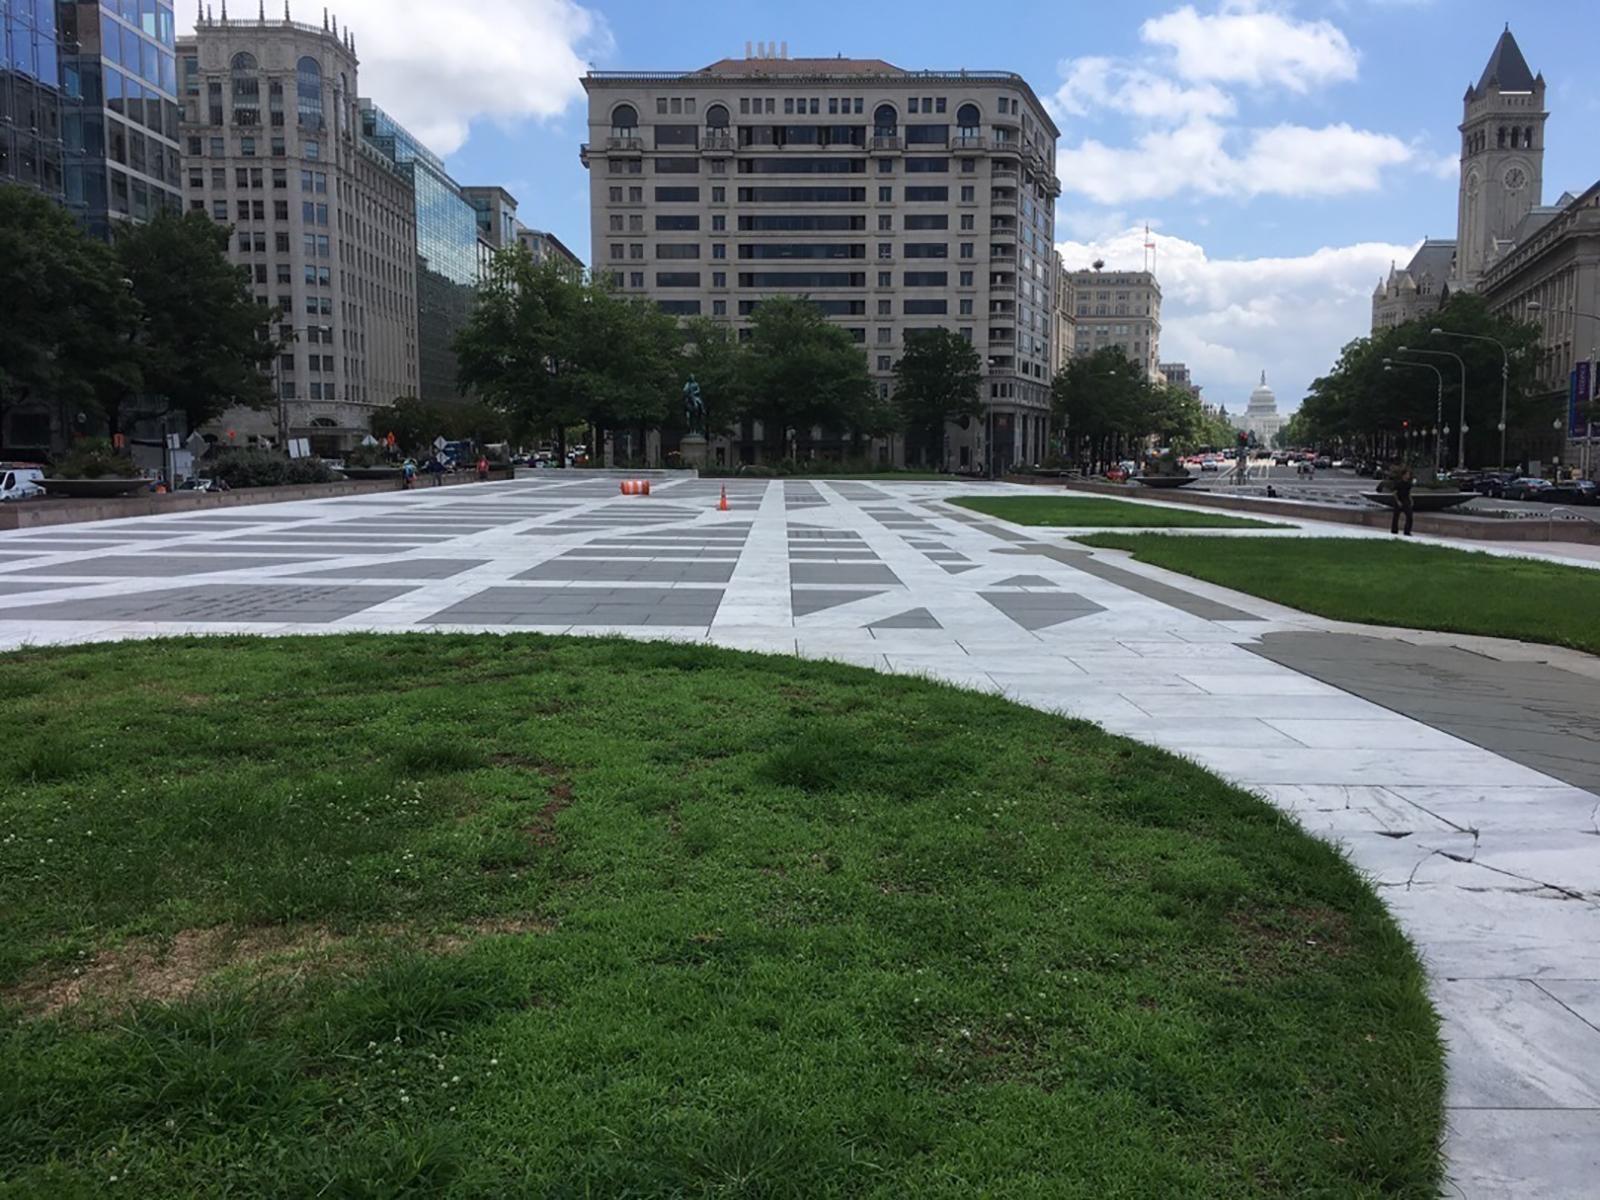 A grass circle in a gray stone plaza with lines resembling streets with the US Capitol in the rear.